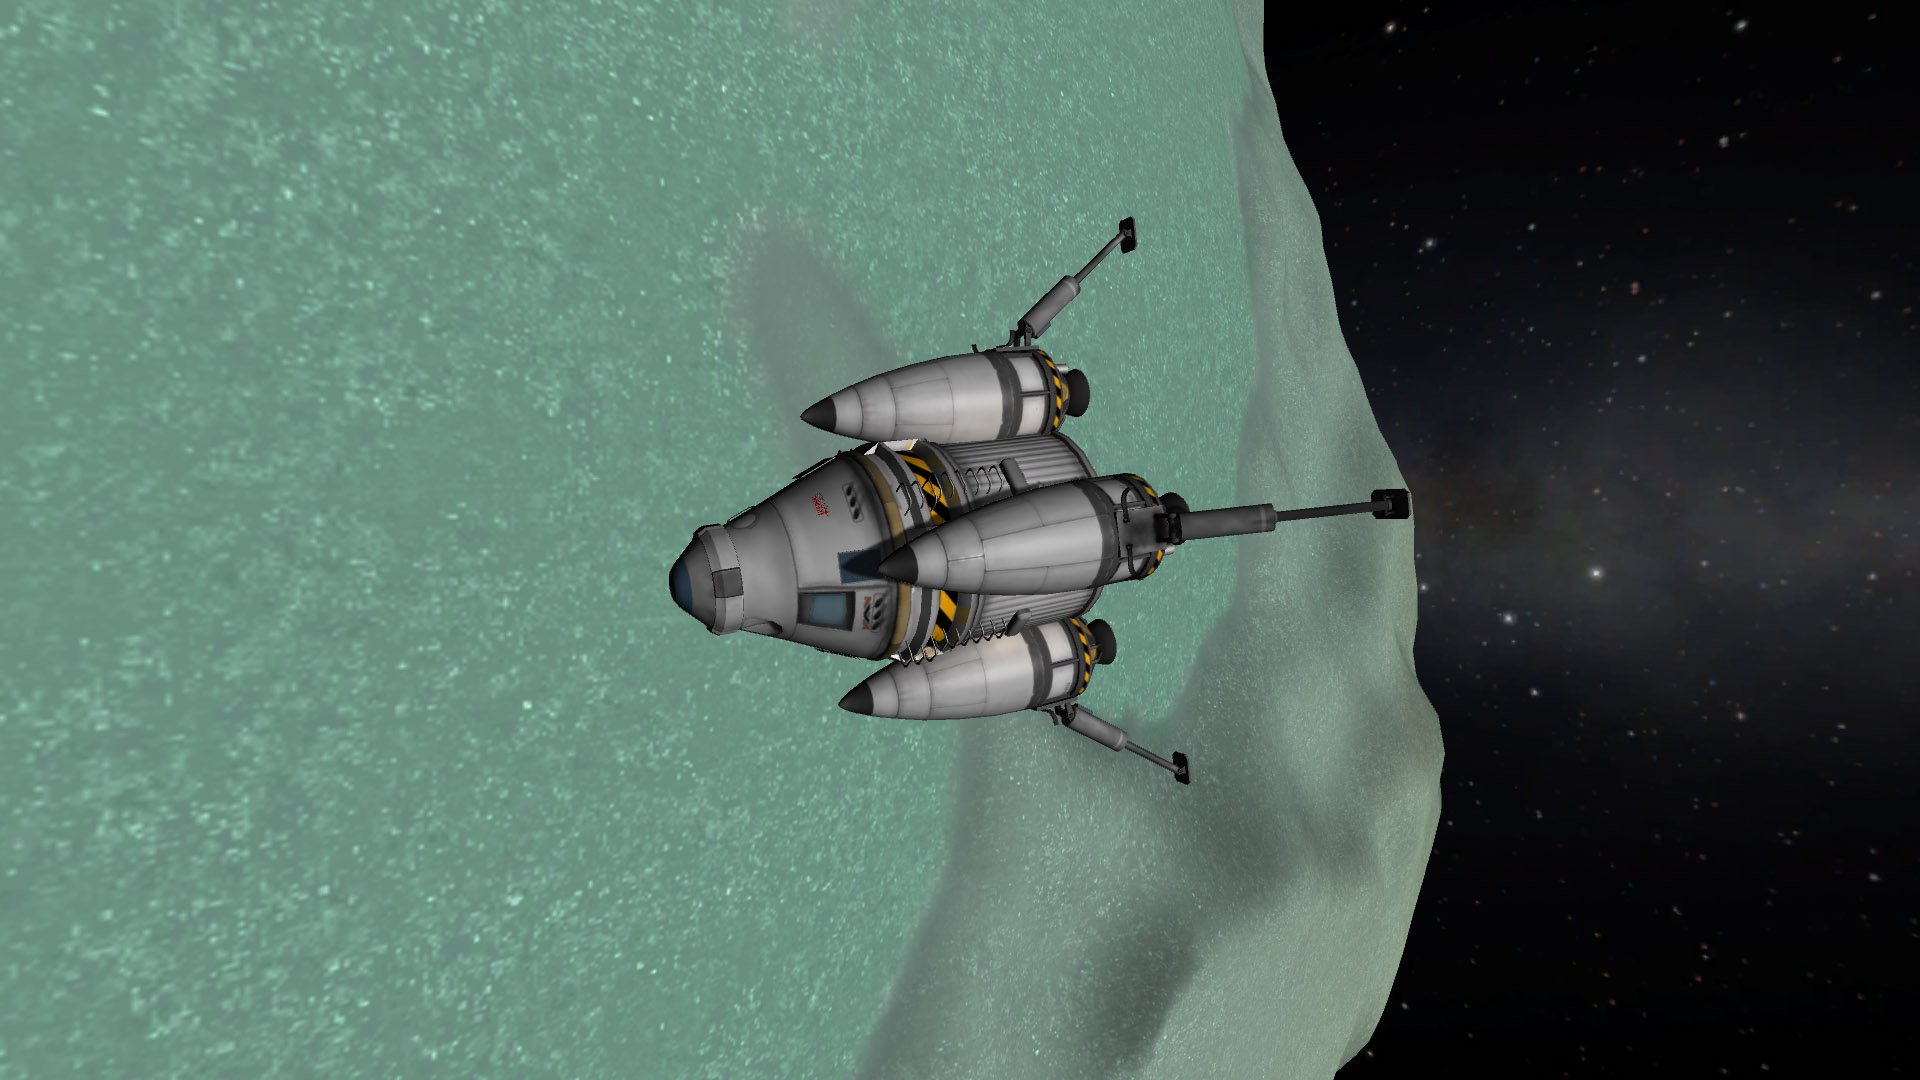 download kerbal space program ps4 for free